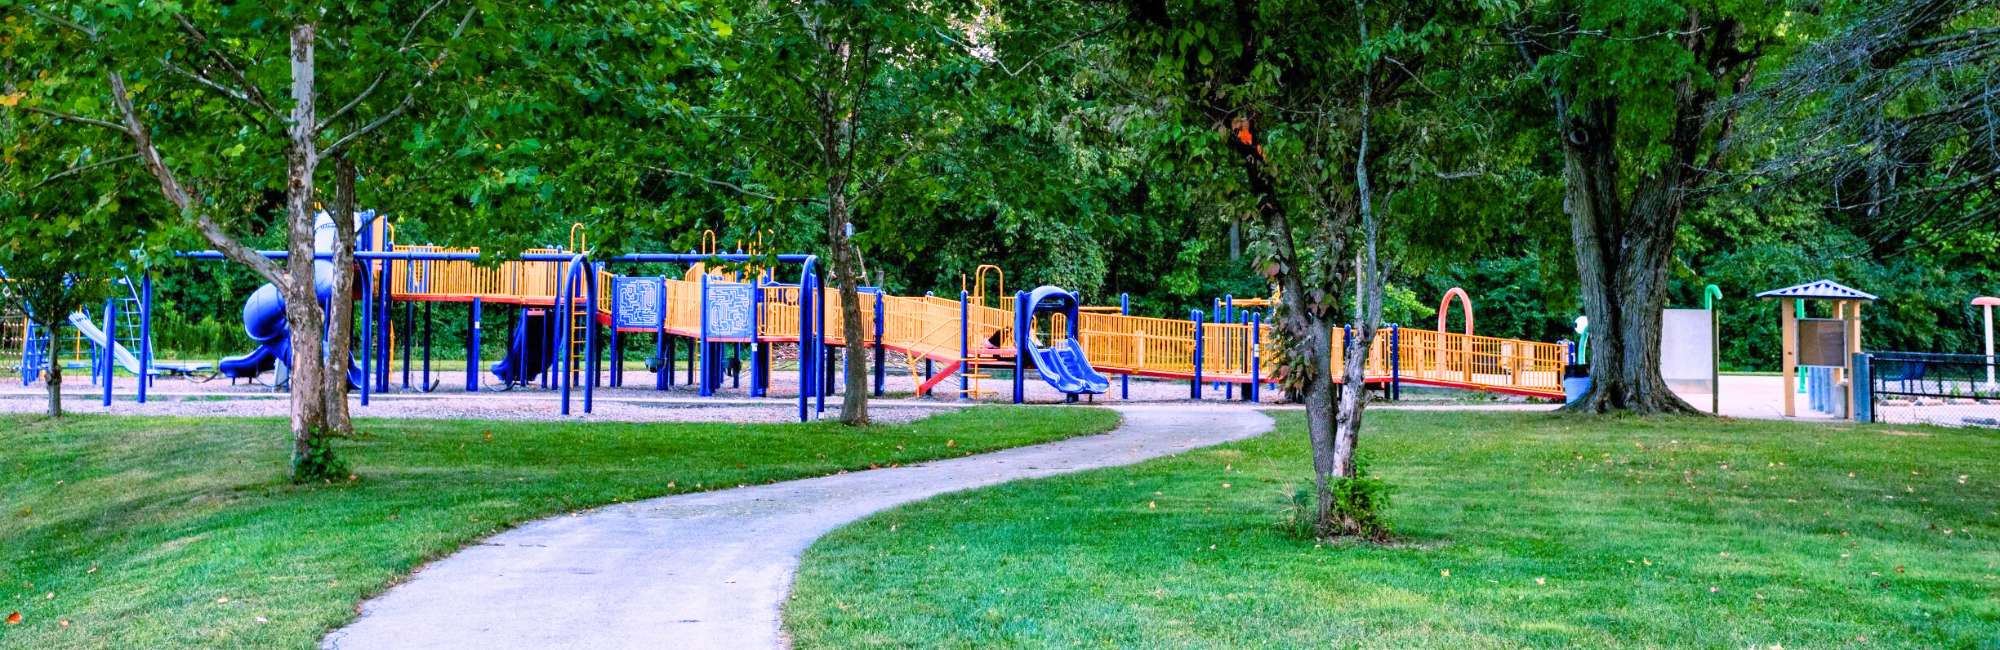 Park with a large expansive playground